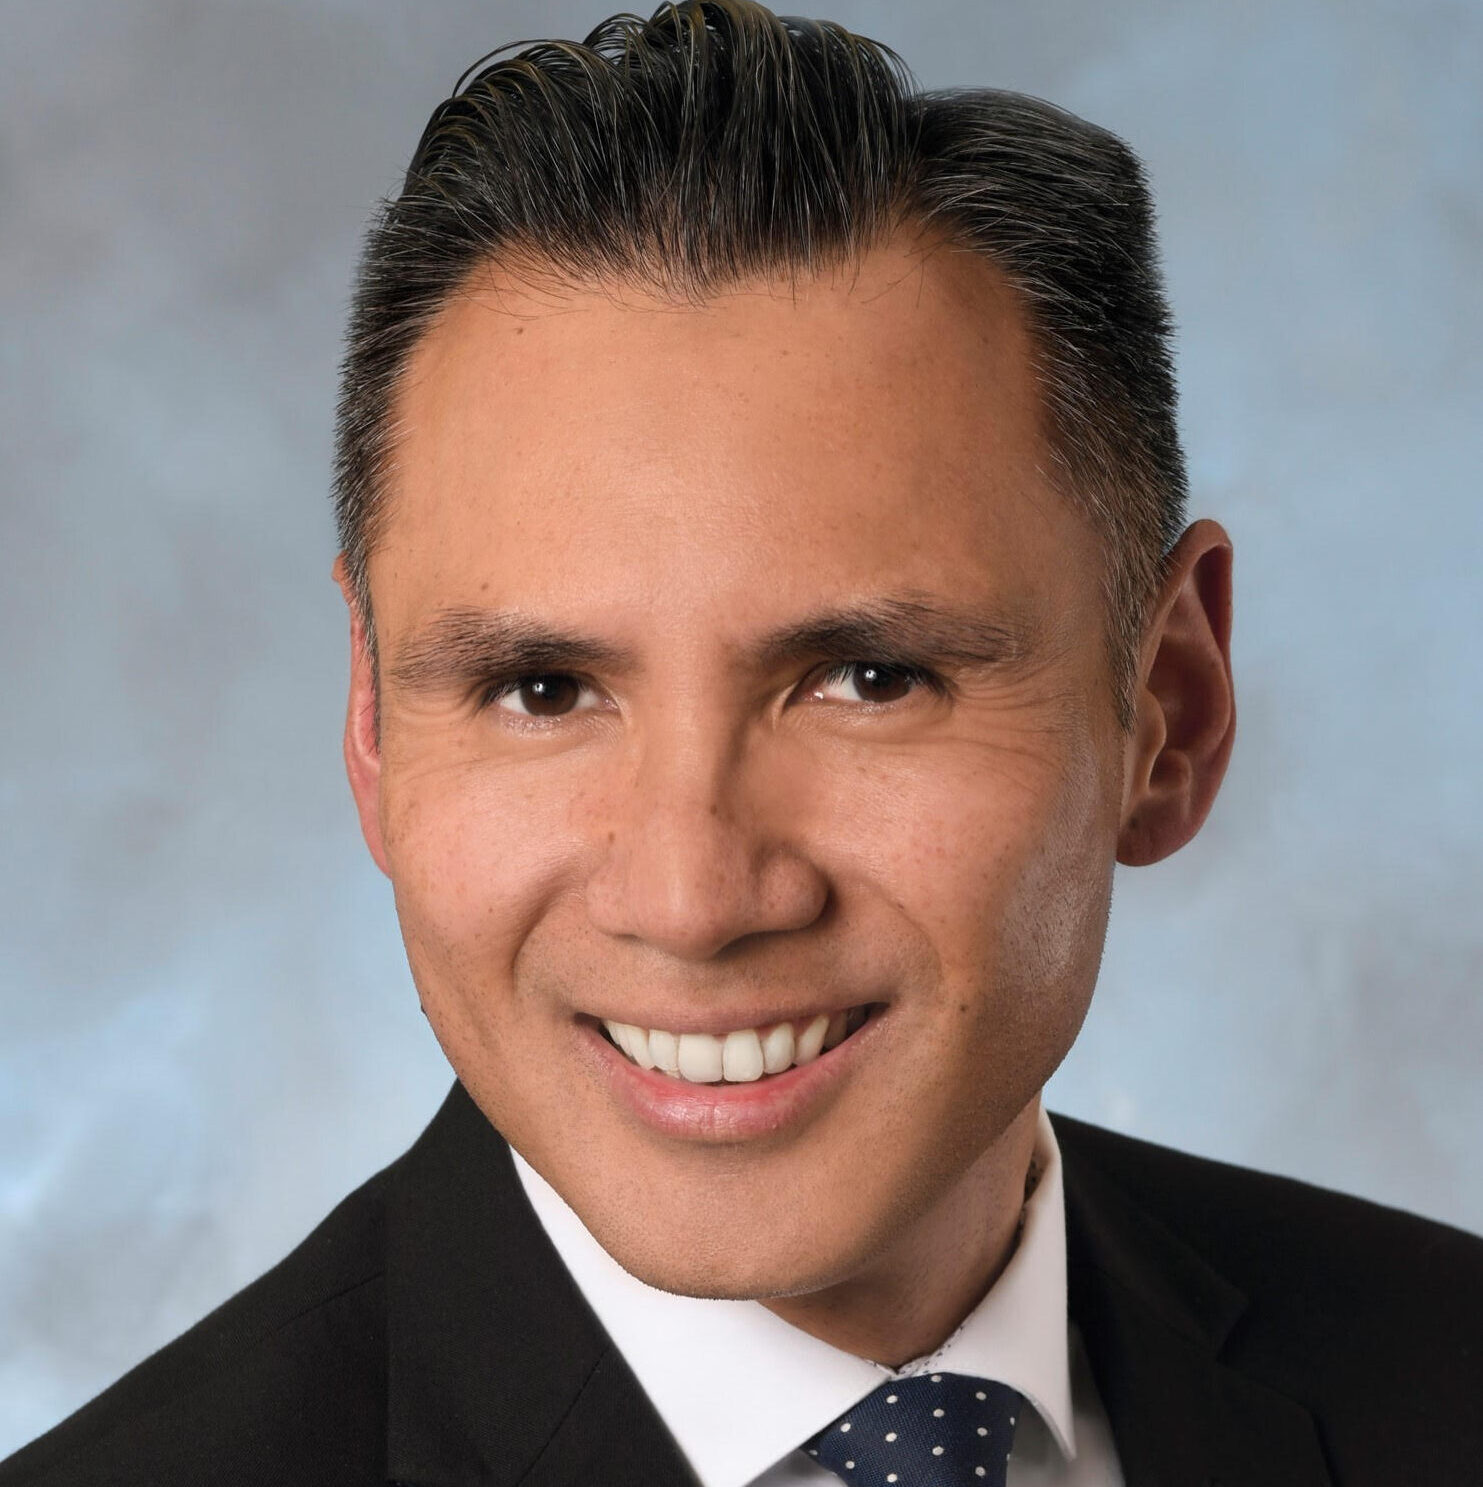 July 23rd, 2020: "Navigating the New Normal: A Port Perspective” with Dr. Noel Hacegaba